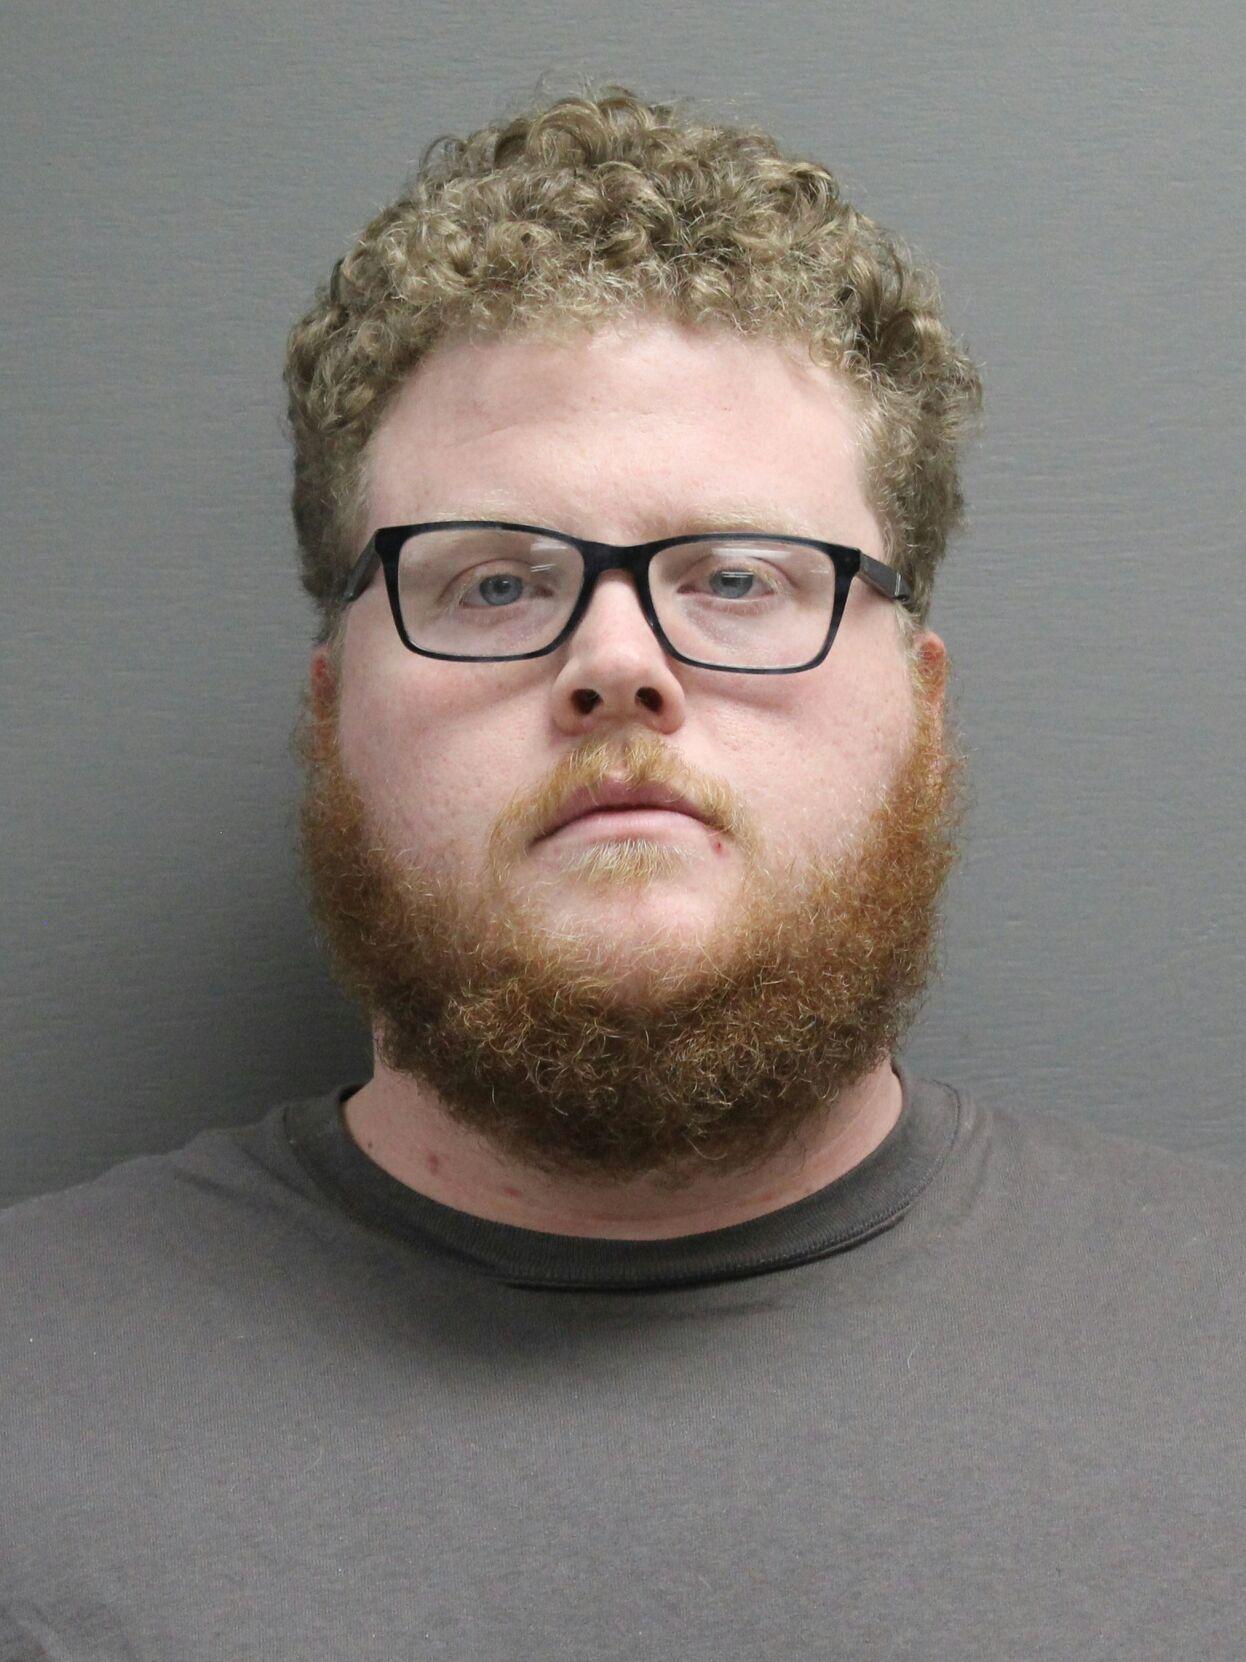 Great Falls Man Arrested After Victims Say He Sexually Assaulted Them When They Were Younger